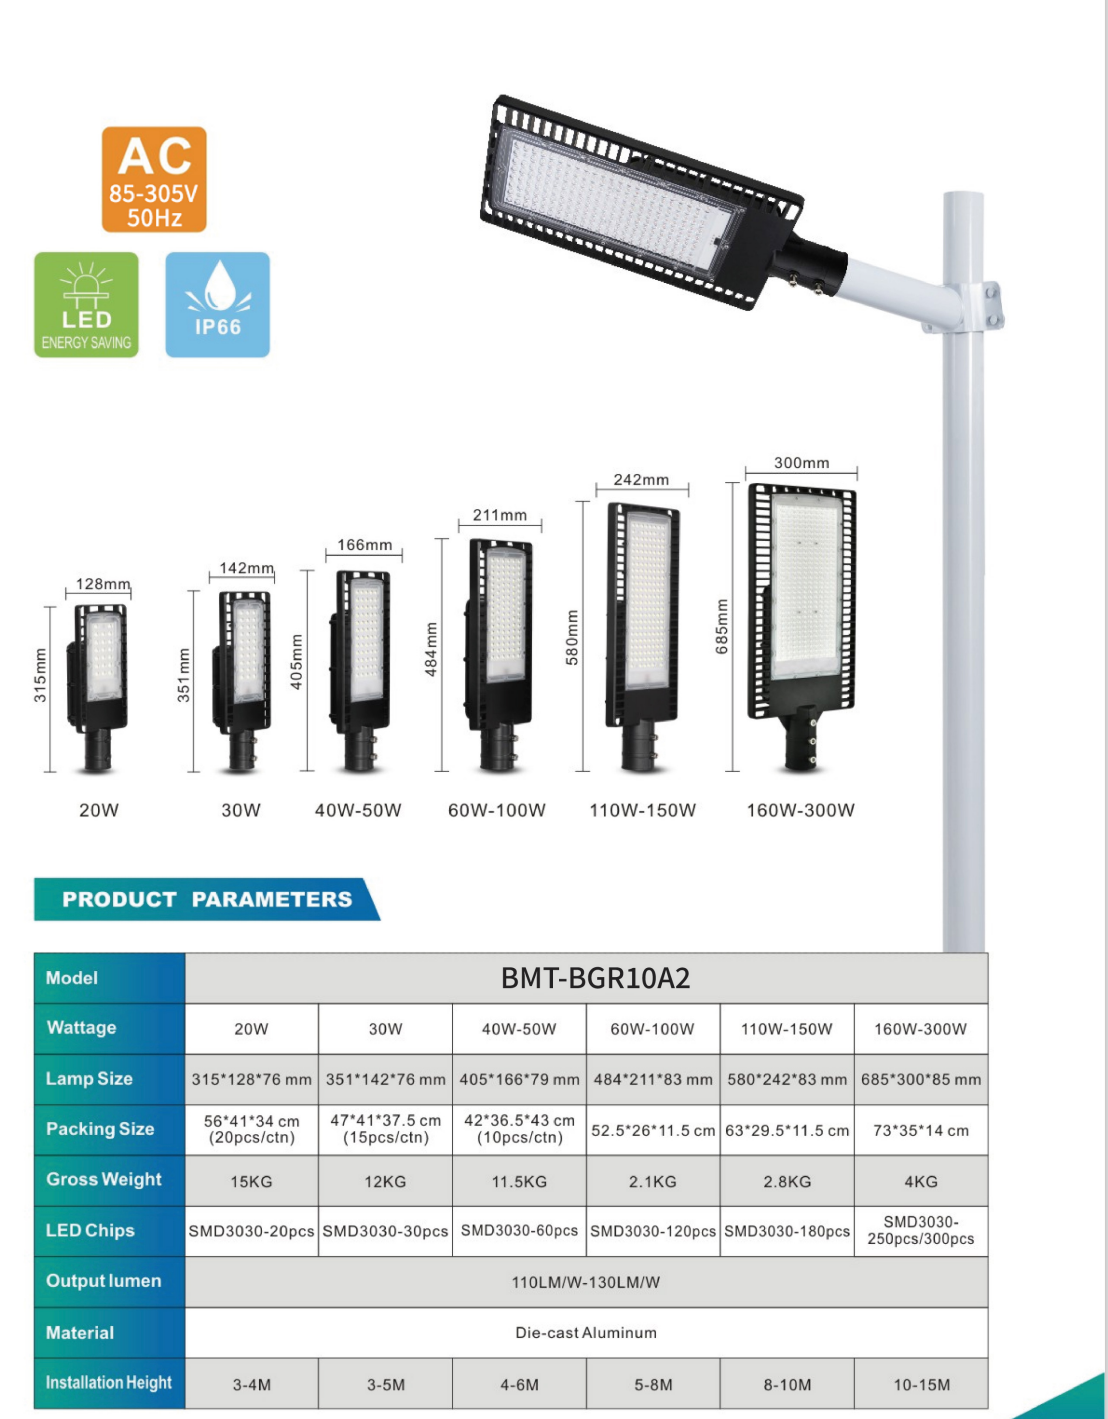 PHILIPS OEM LED Street Light BMT-BGR10A2 PHILIPS led chip Philips driver 5 years warranty